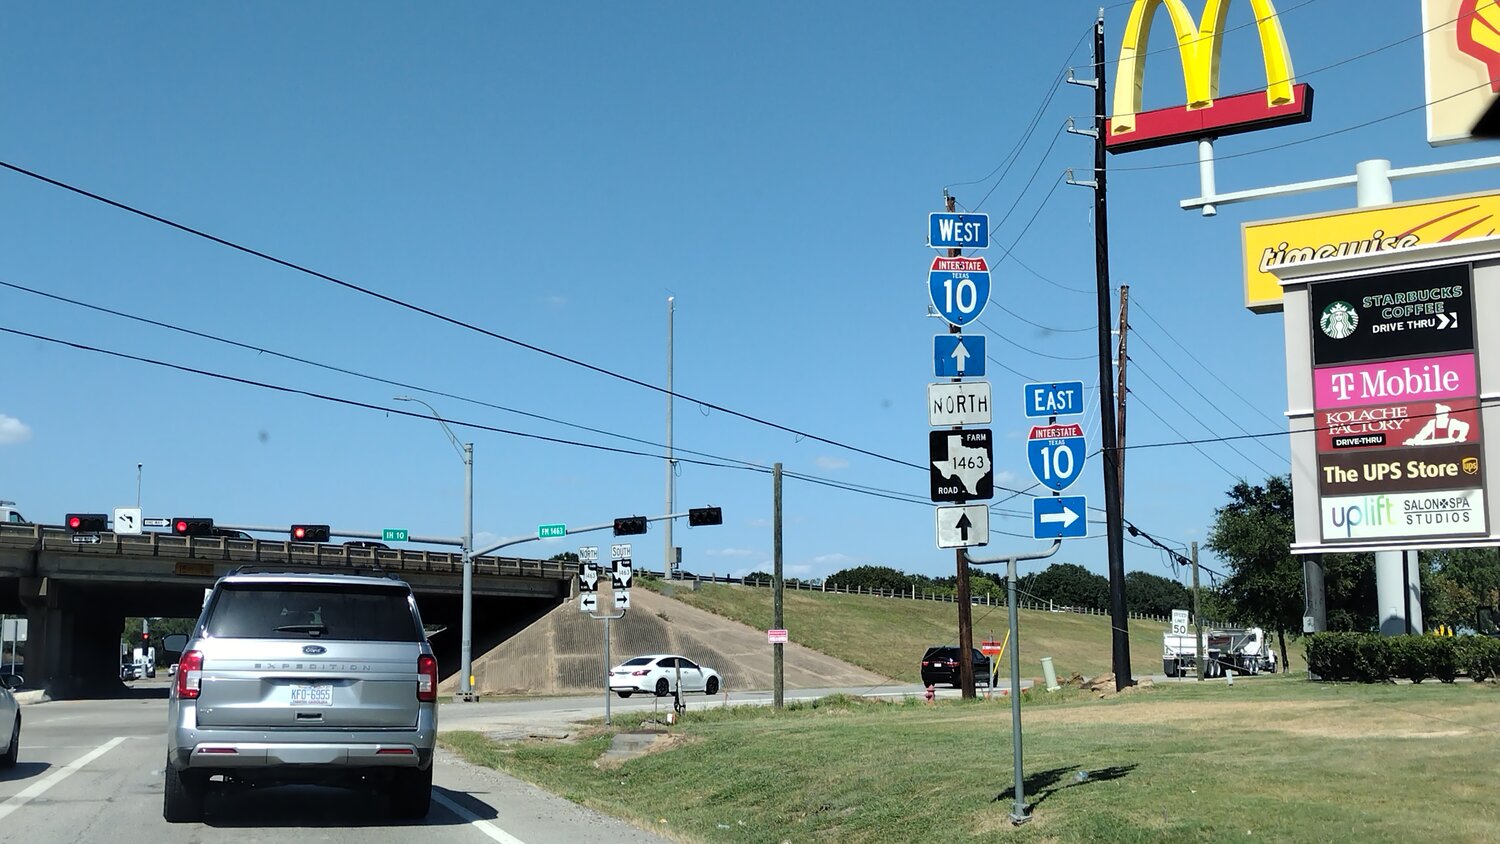 According to data gathered by local personal injury attorney Shane McClelland, the crossroad of I-10 and FM 1463 is the most dangerous intersection in the greater Katy area.